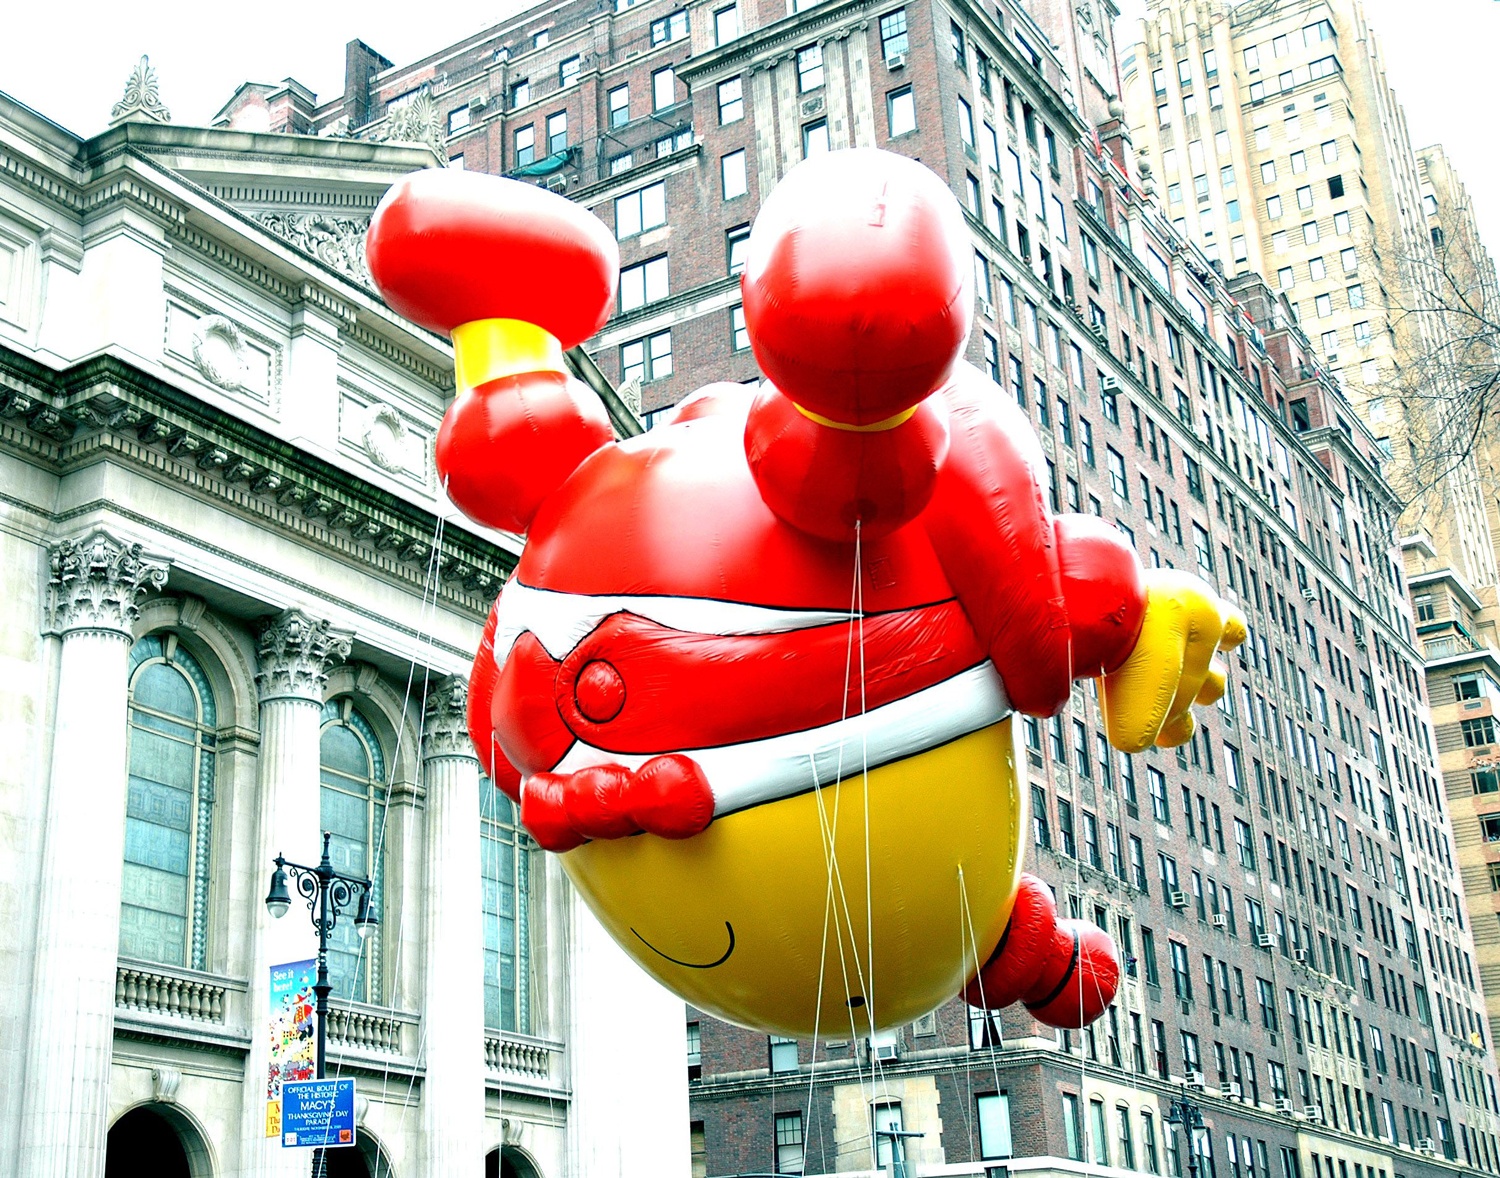 8 Of The Most Artful Balloons From Macy S Thanksgiving Day Parade Galerie